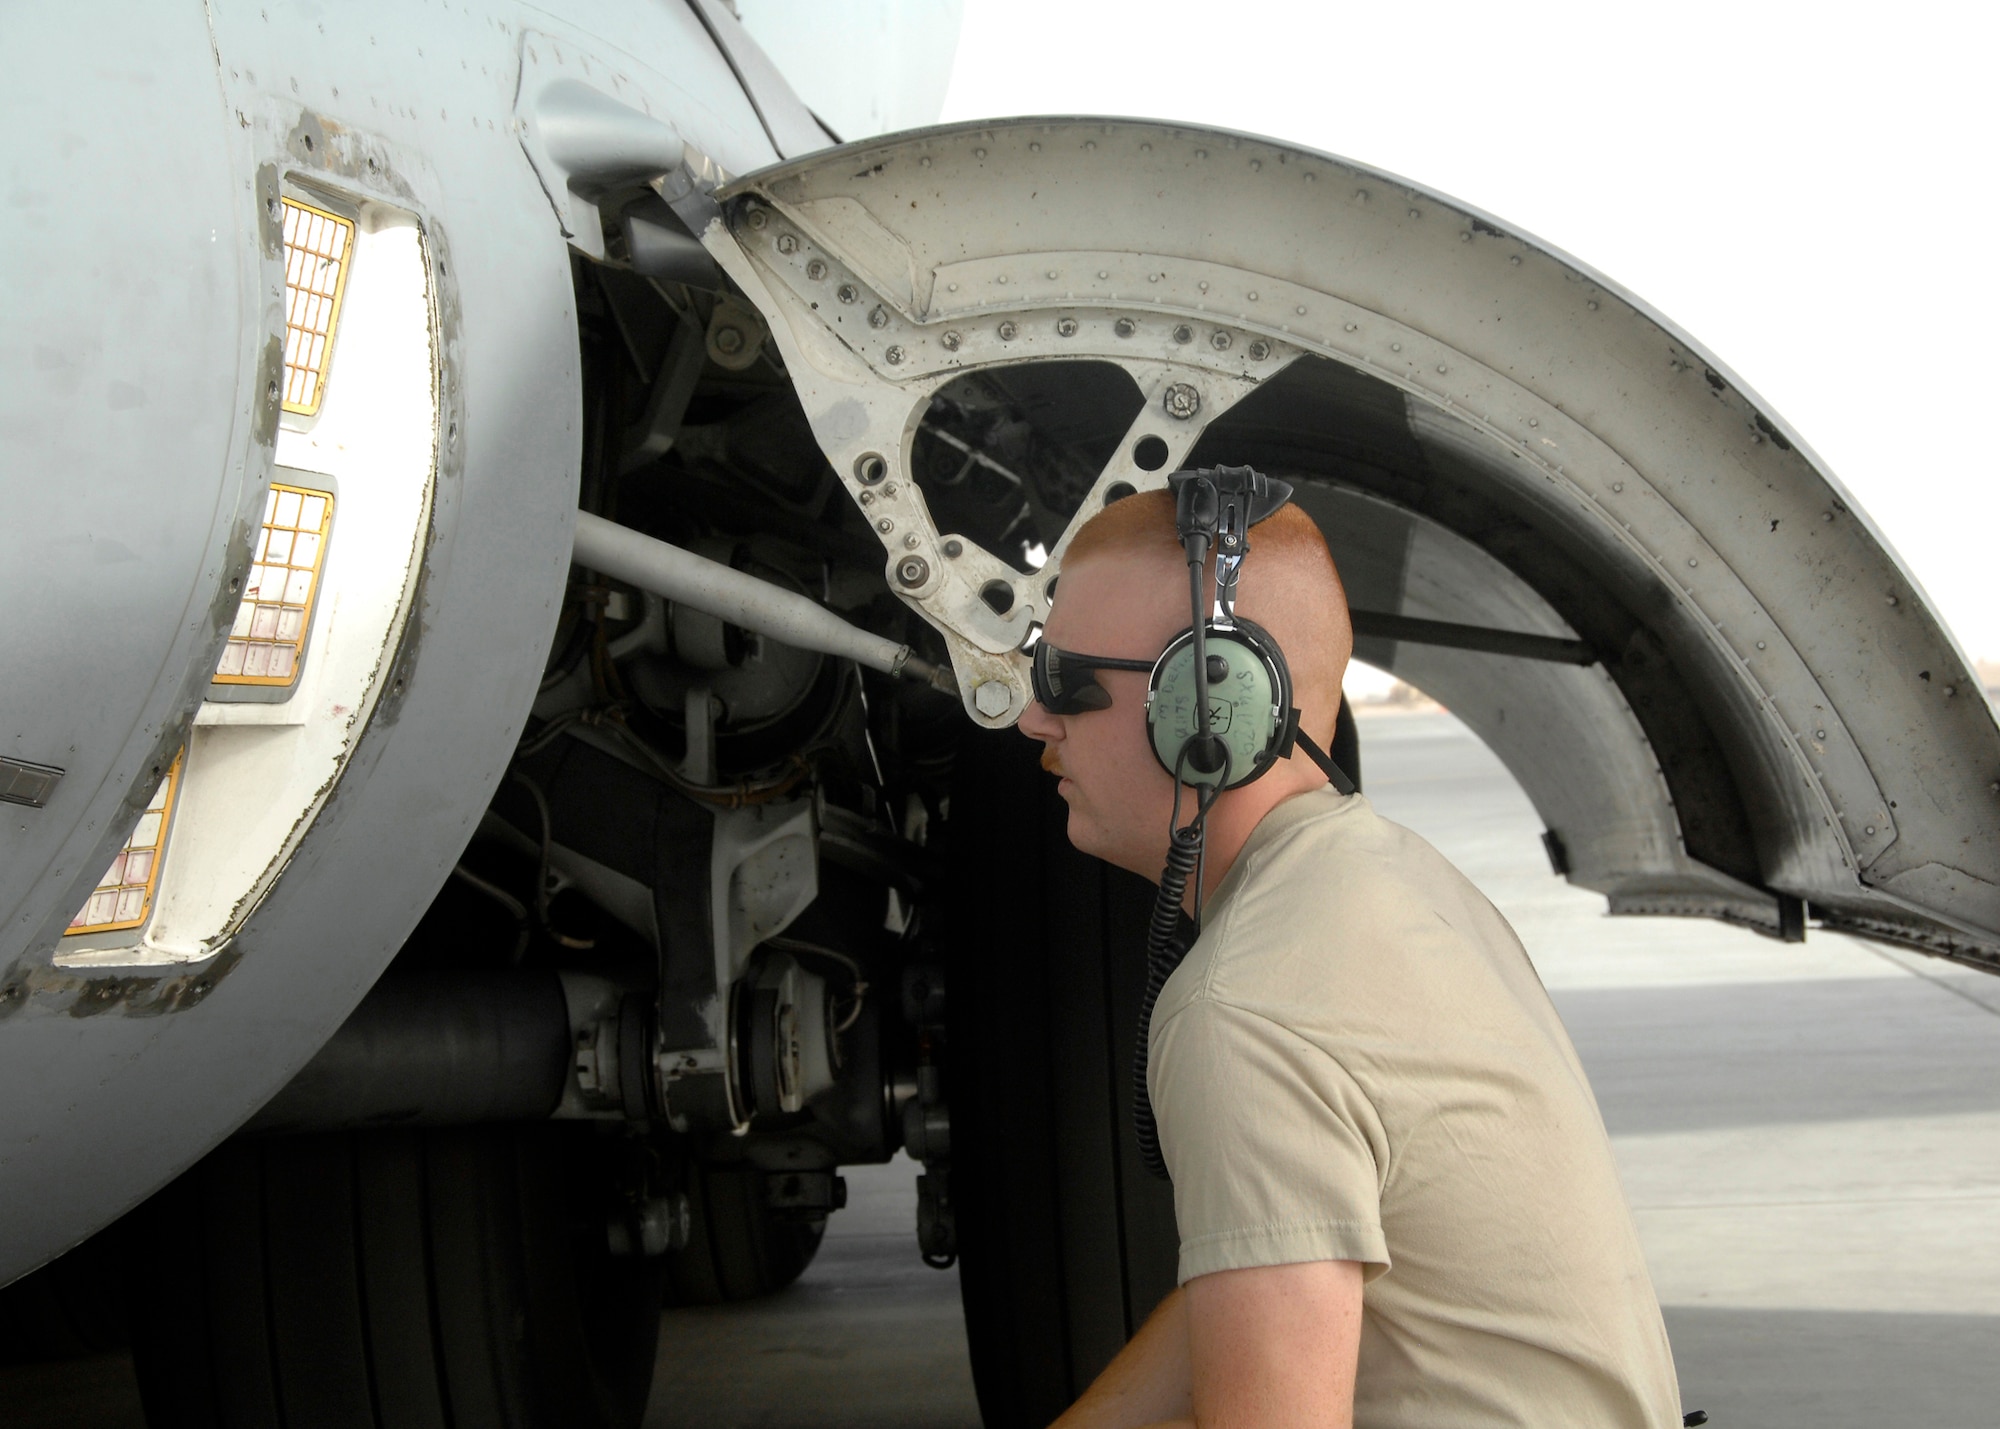 SOUTHWEST ASIA -- Airman 1st Class Michael Depue, 5th Expeditionary Aircraft Maintenance Squadron crew chief, visually checks aircraft flares to make sure they are properly seated on a C-17 Globemaster III aircraft on Nov. 26 at an air base in Southwest Asia. The 5 EAMS performs maintenance on C-5 and C-17 aircraft deployed in support of Operations Iraqi and Enduring Freedom. Airman Depue is deployed from McCord Air Force Base, Wash. (U.S. Air Force photo/Tech. Sgt. Raheem Moore)